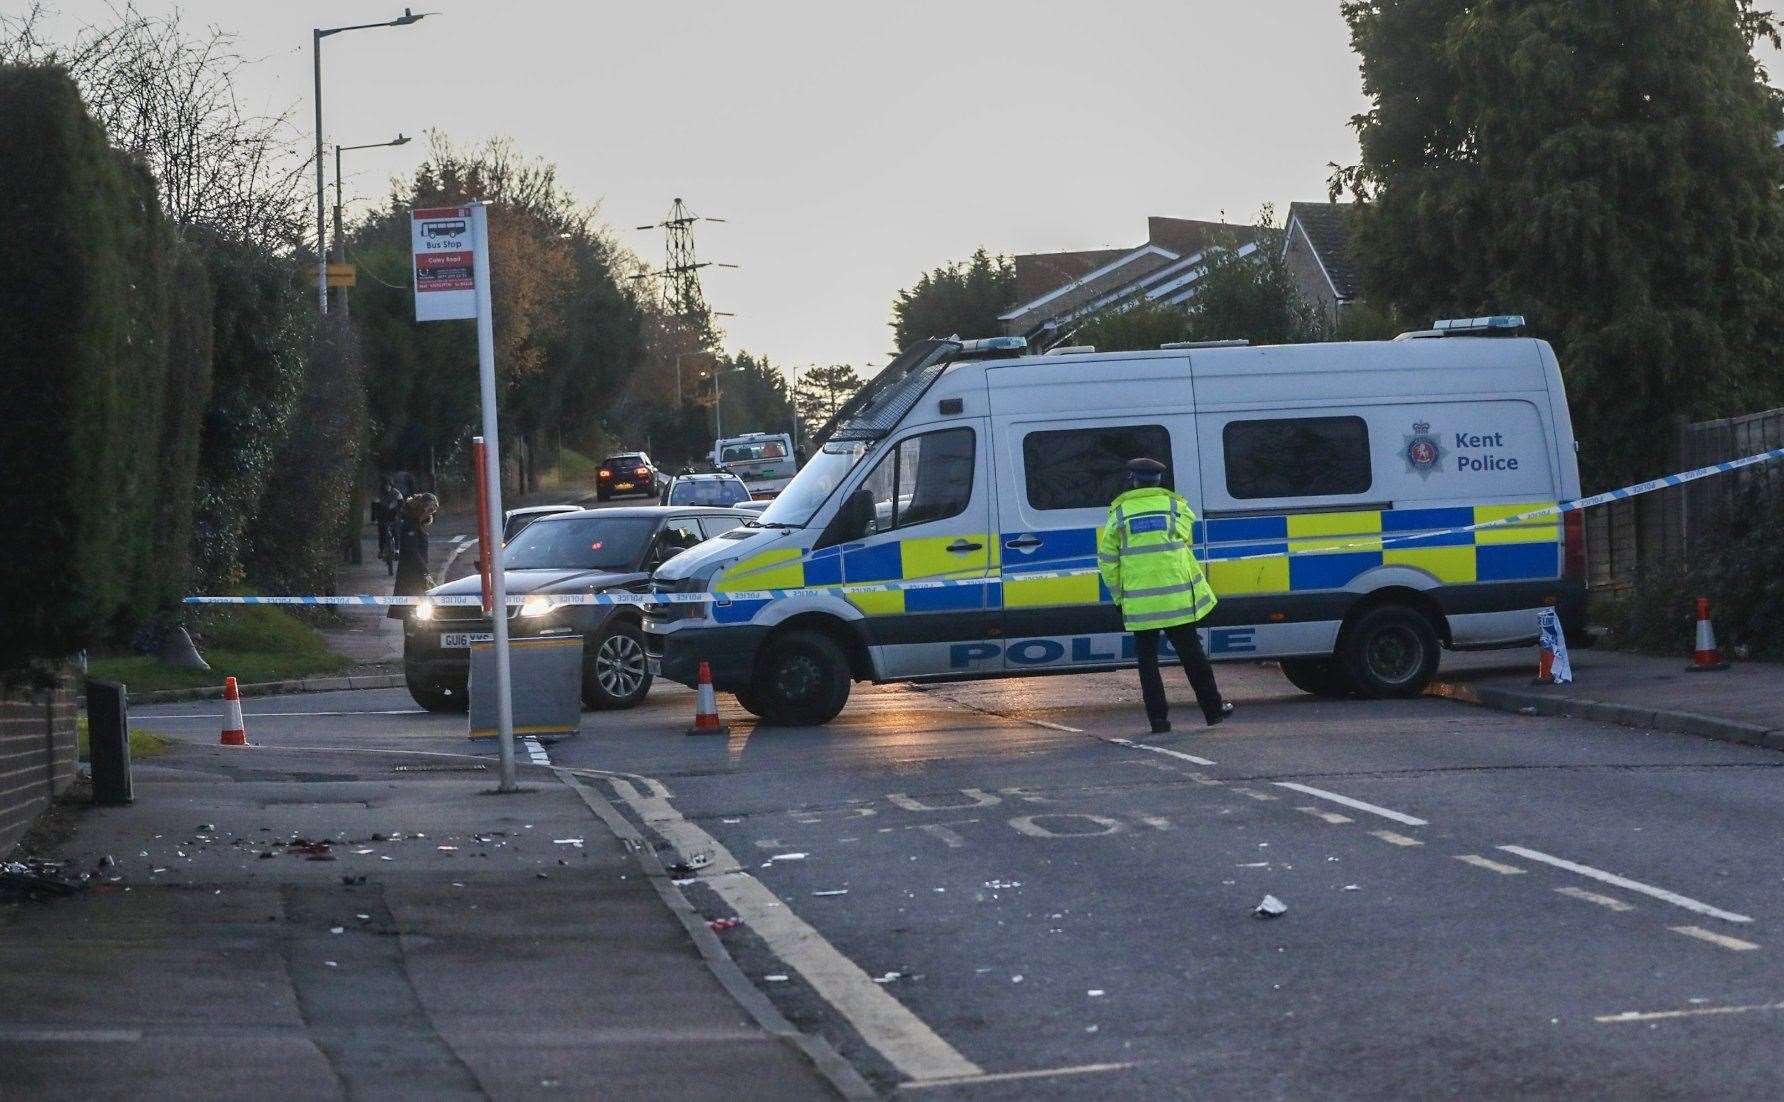 Police at the scene in Caley Road, Tunbridge Wells. Picture: UKNIP (53507749)